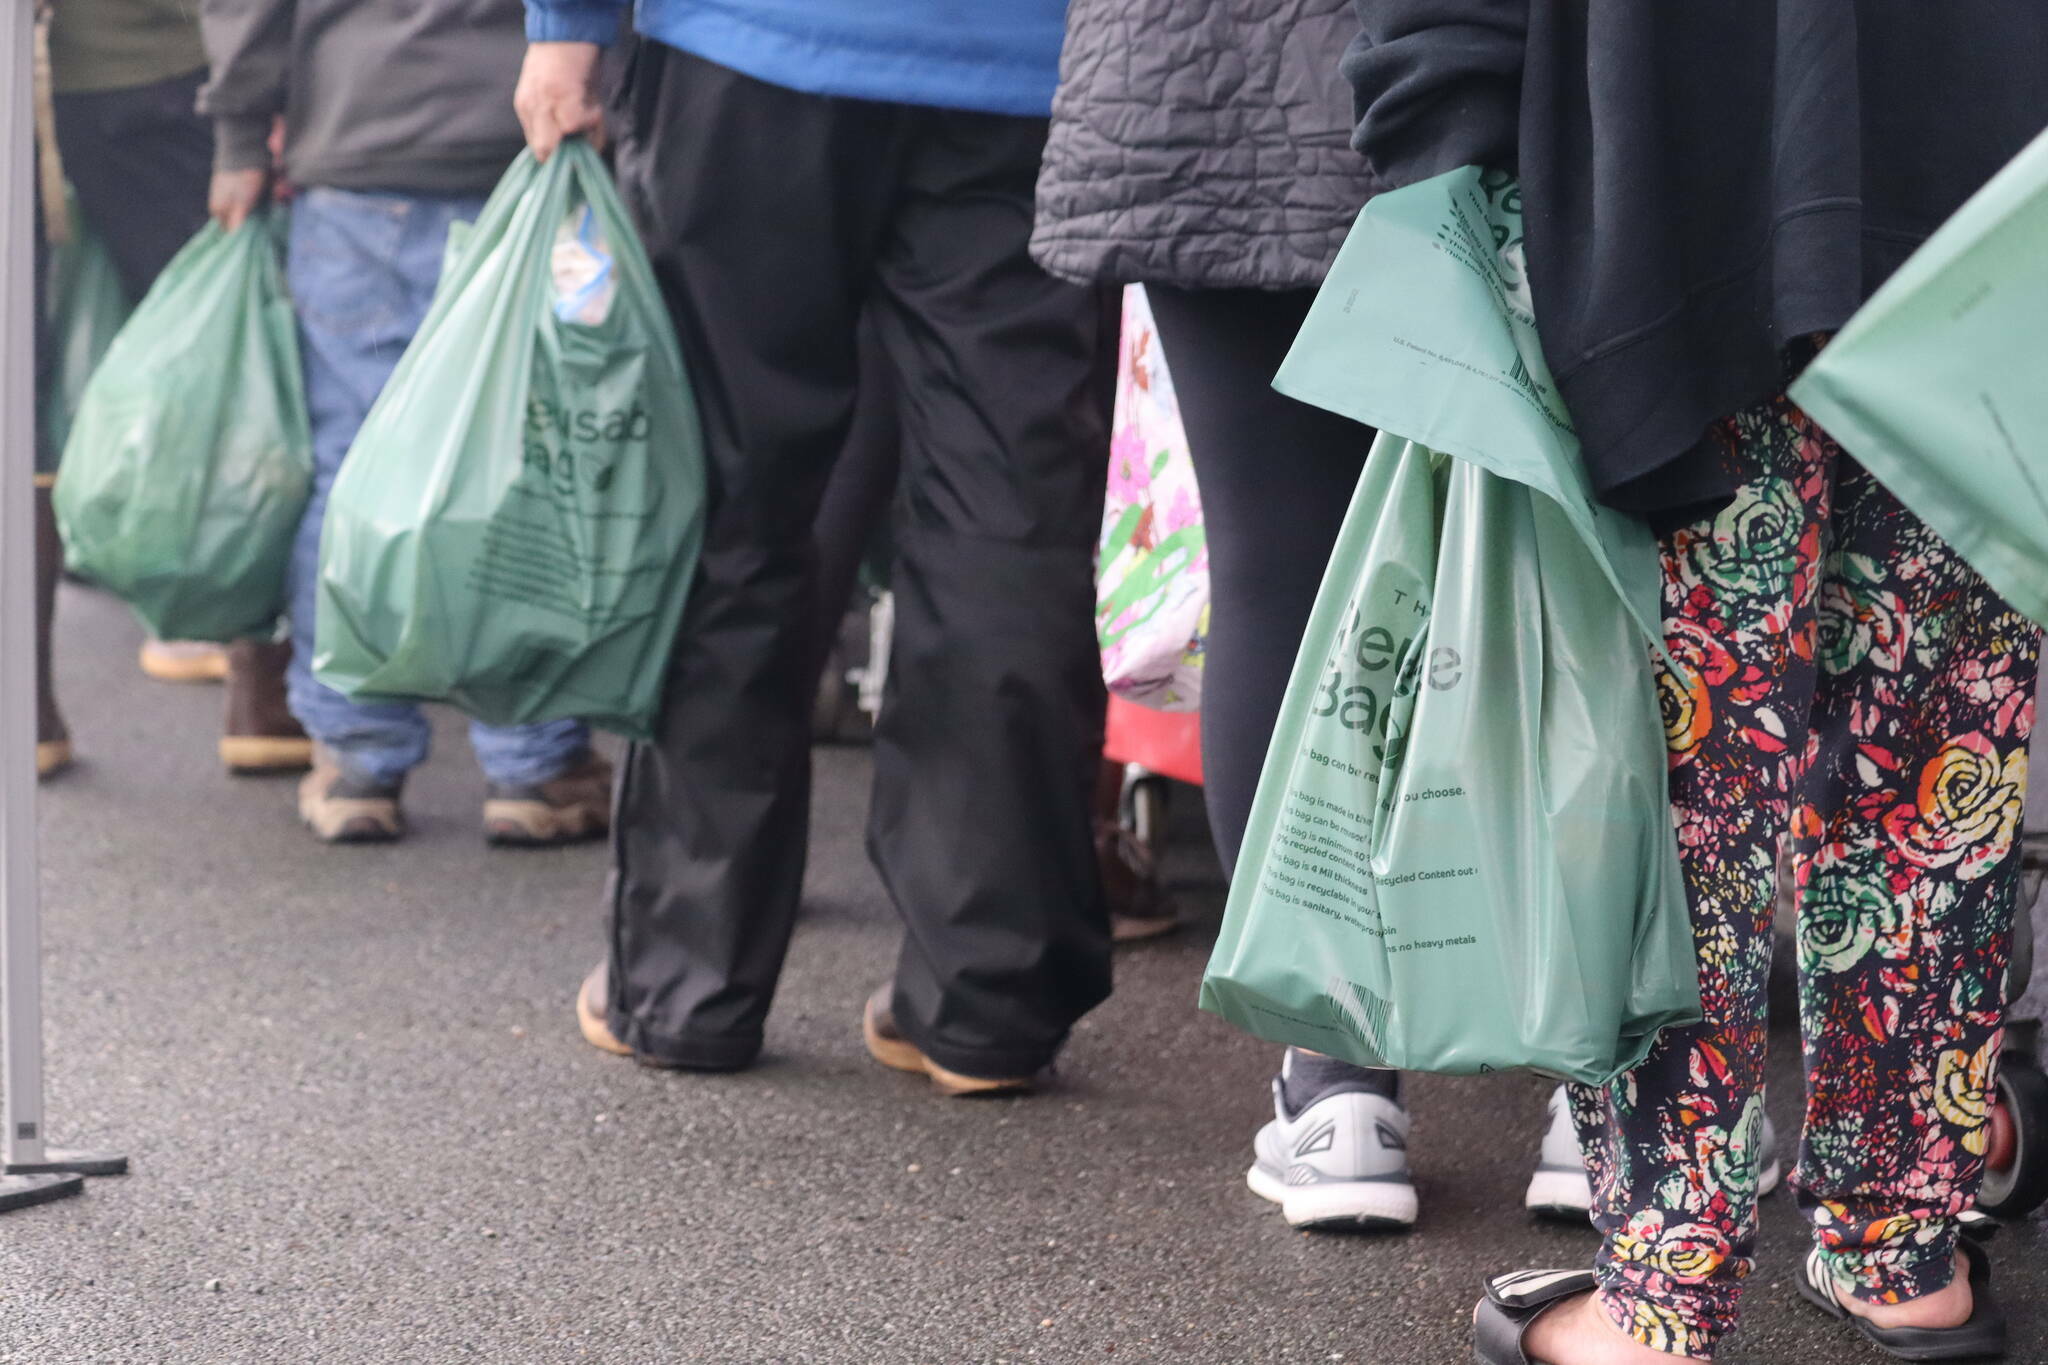 A long line of residents pick up groceries at the Southeast Alaska Food Bank on Aug. 20, 2022. (Jonson Kuhn / Juneau Empire file photo)